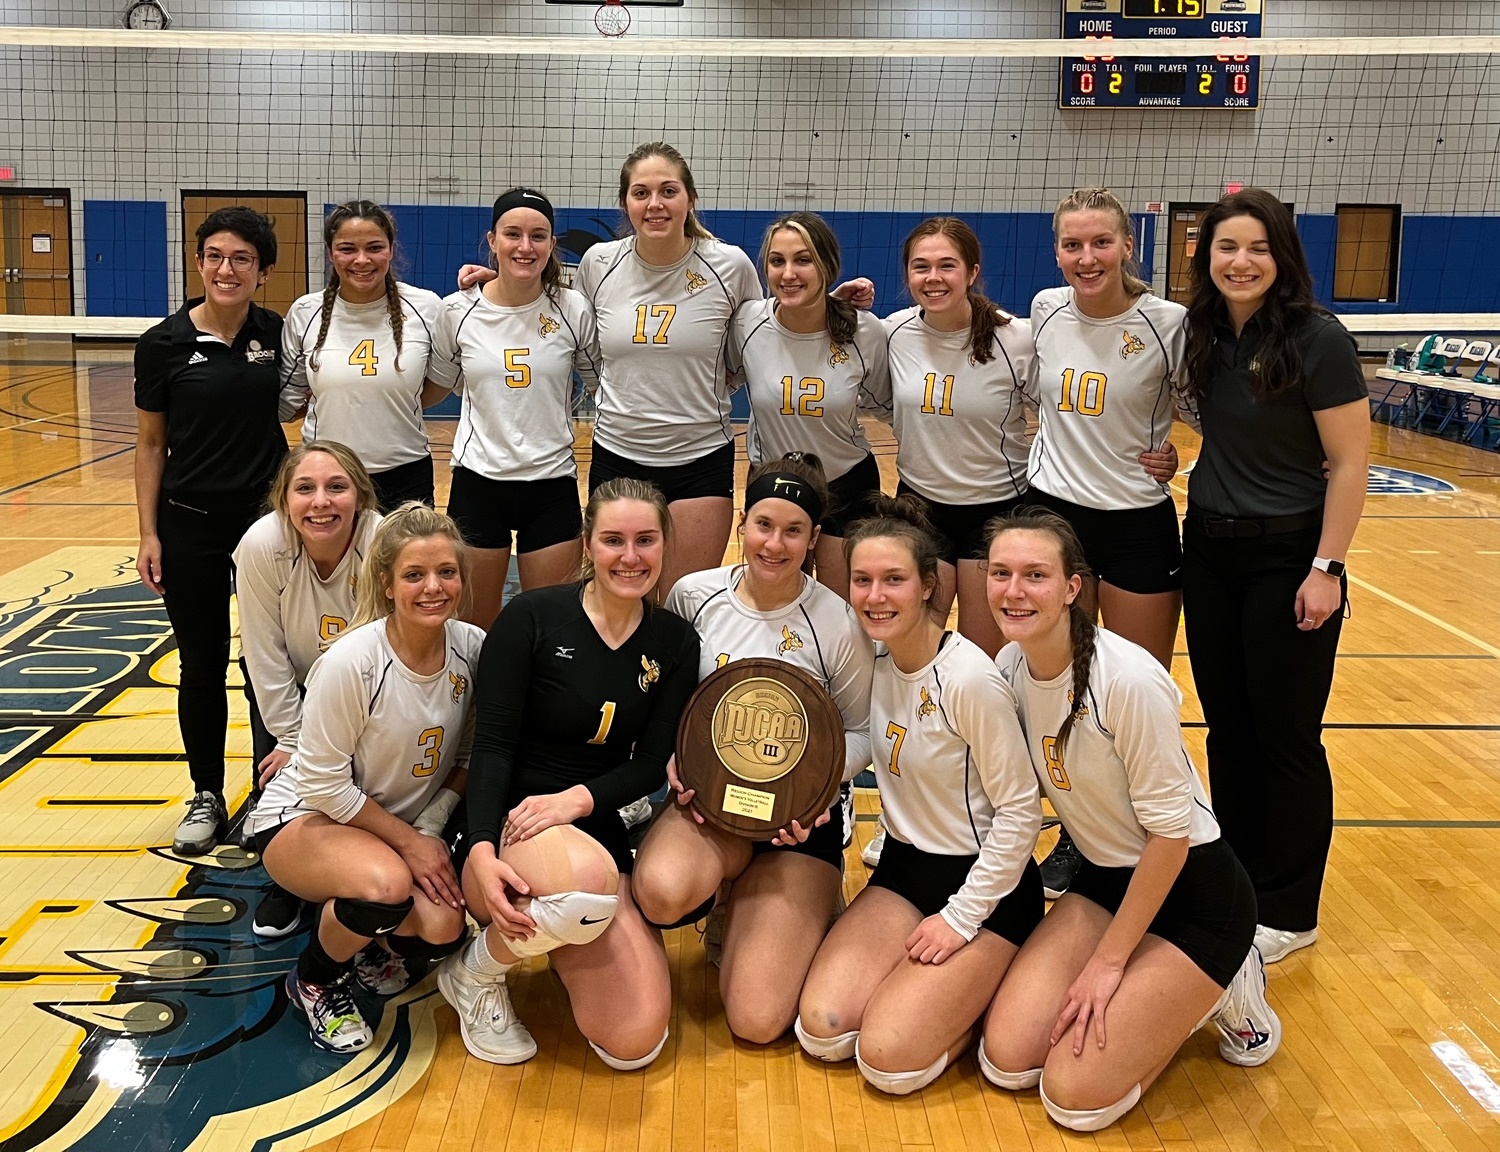 Volleyball team posing with Championship plaque